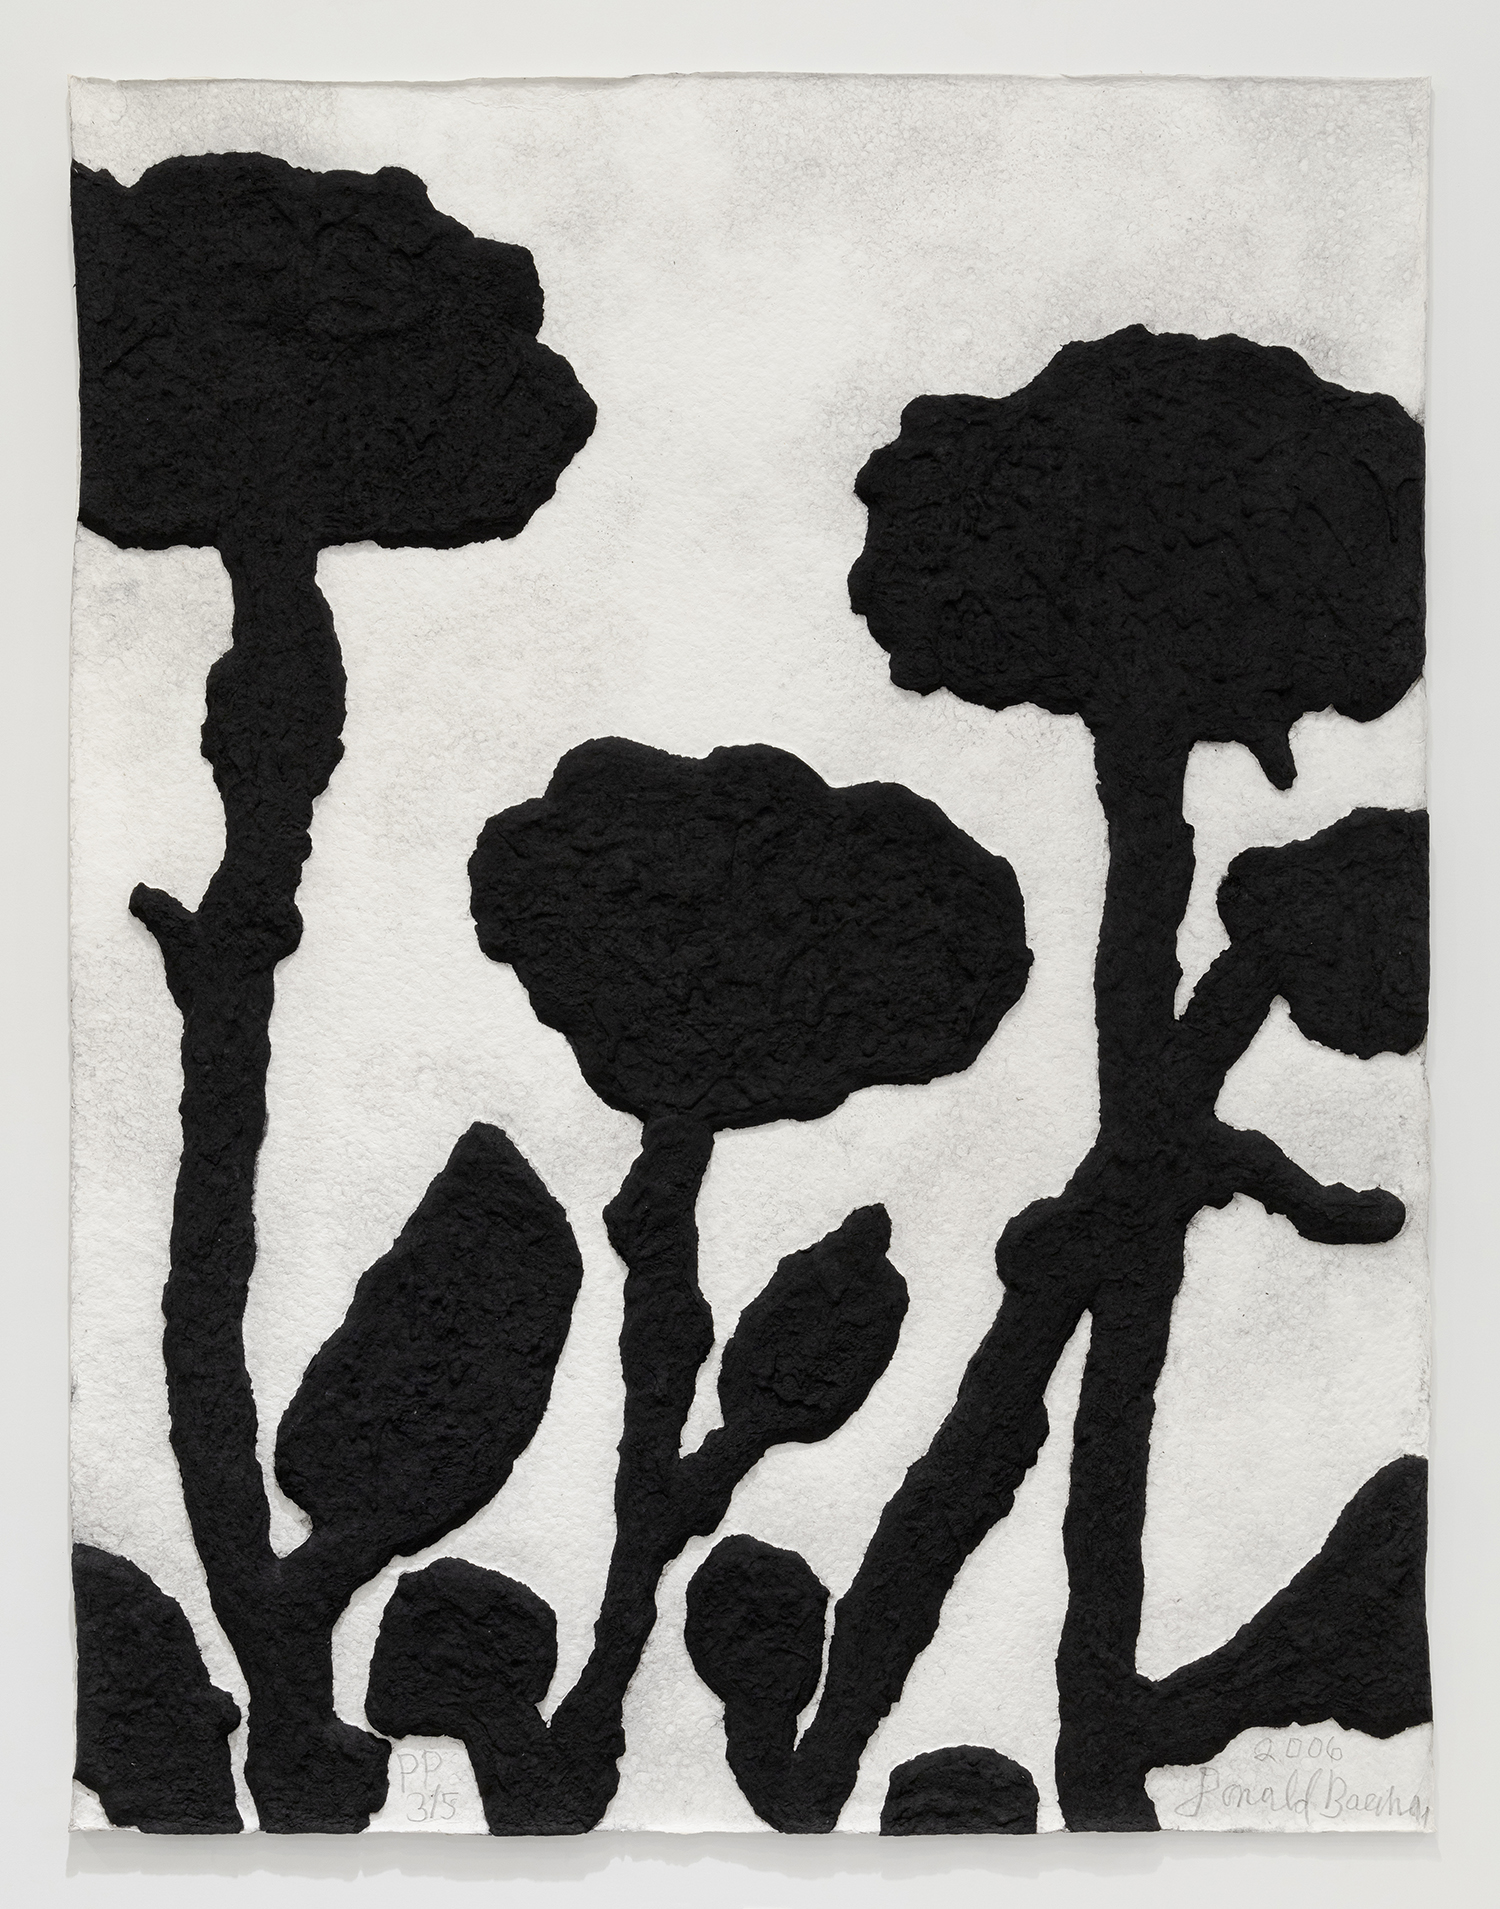 Donald Baechler Cast Flowers, 2006 Cast and dyed paper 38 1/2 x 30 inches (97.8 x 76.2 cm) Edition of 35